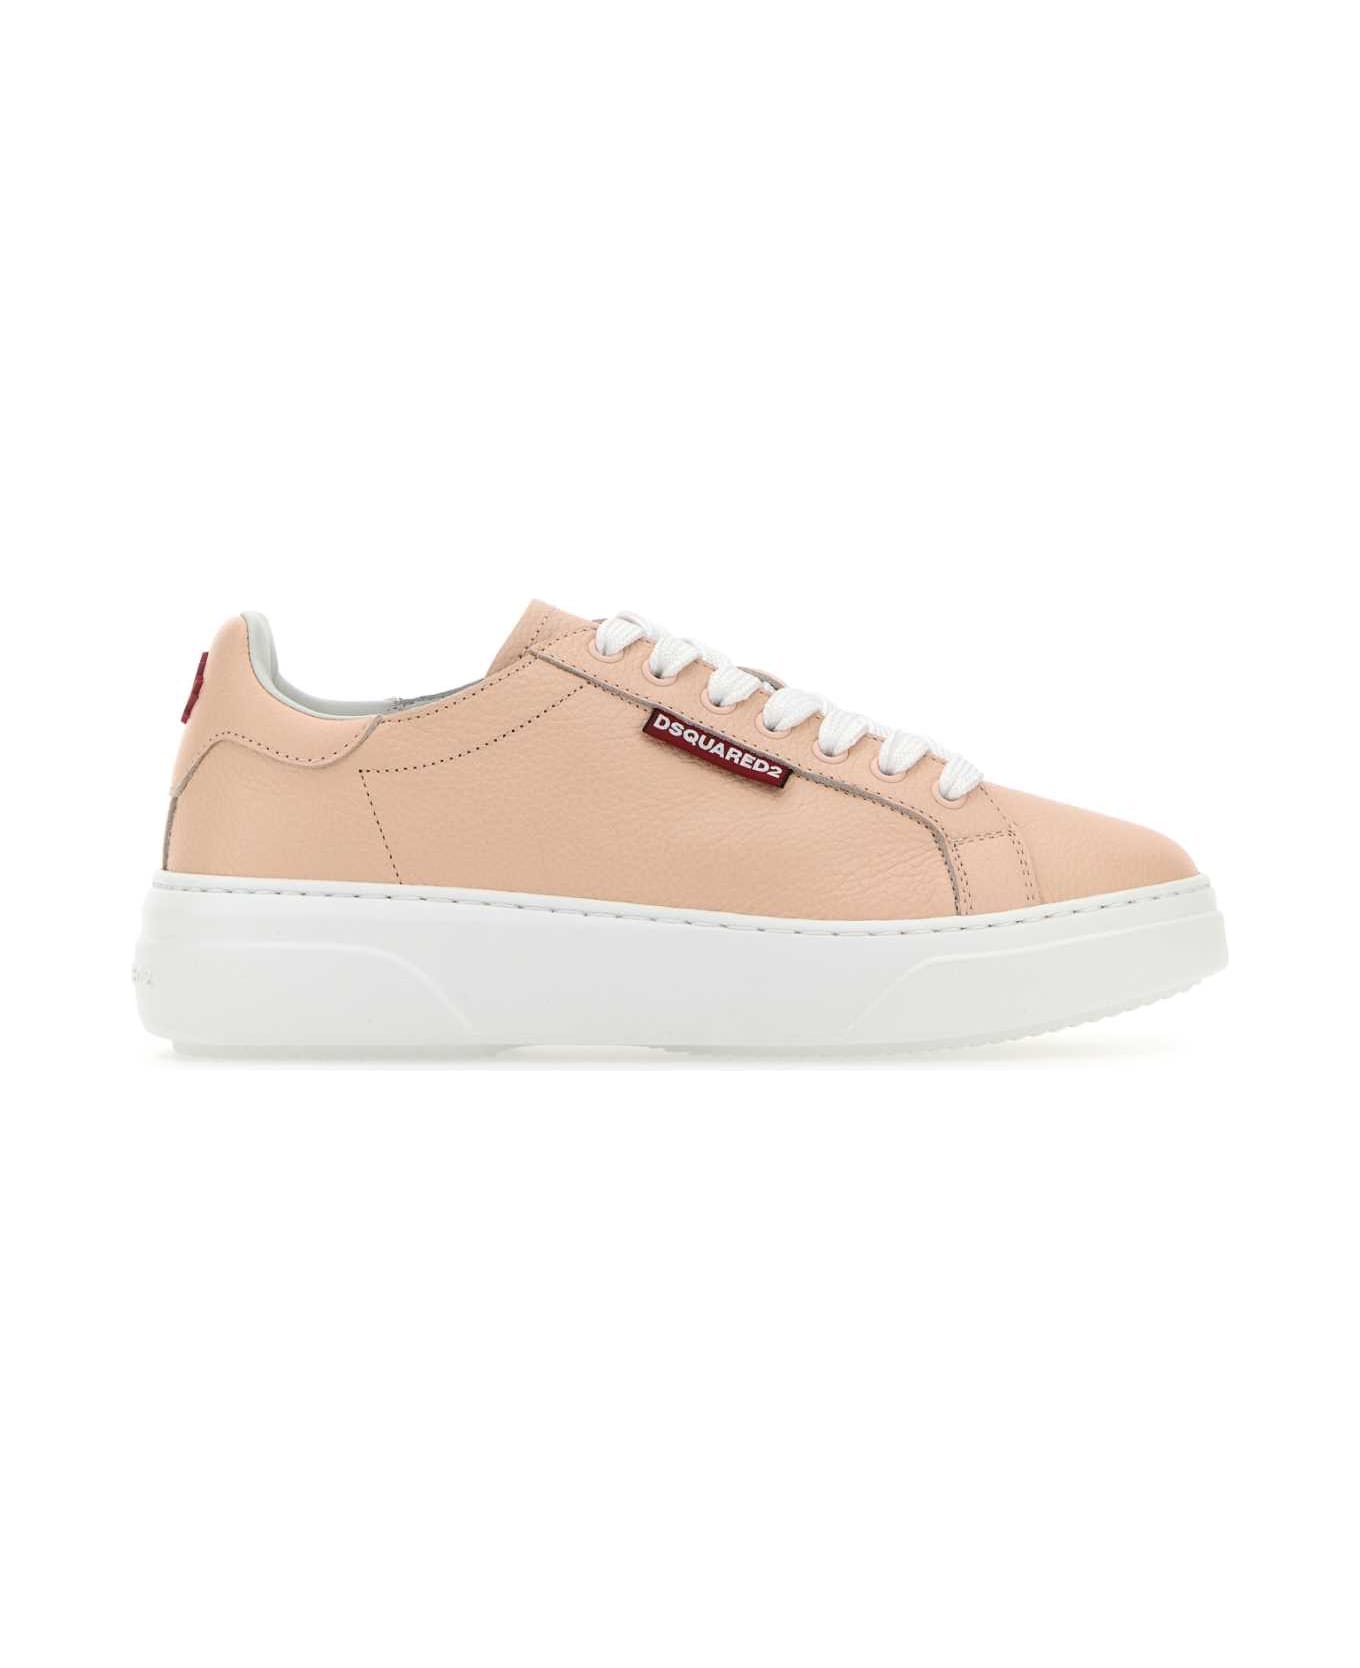 Dsquared2 Light Pink Leather Bumper Sneakers - PINK